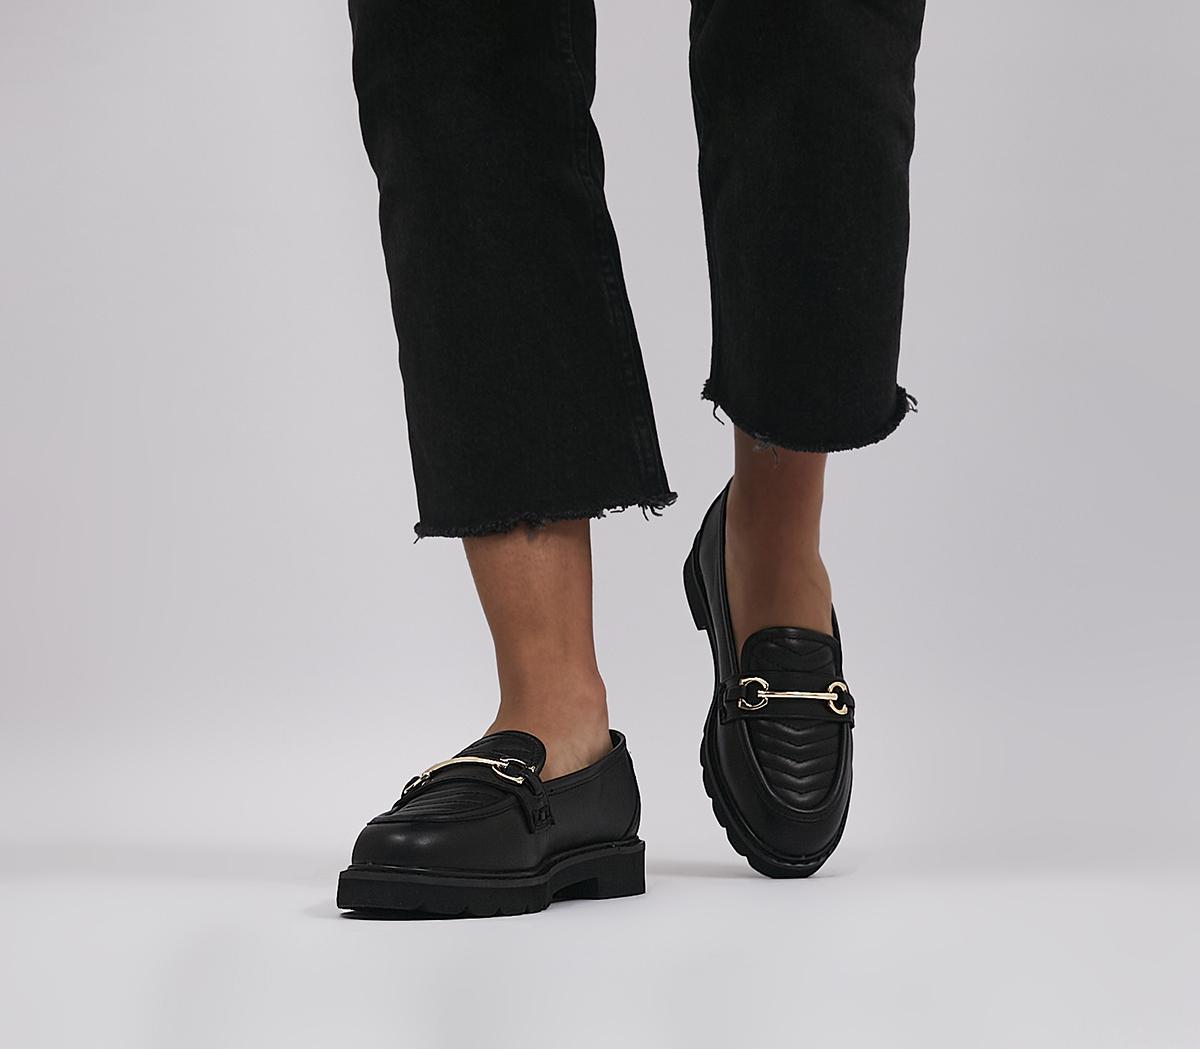 OFFICEFrill Leather LoafersBlack Leather